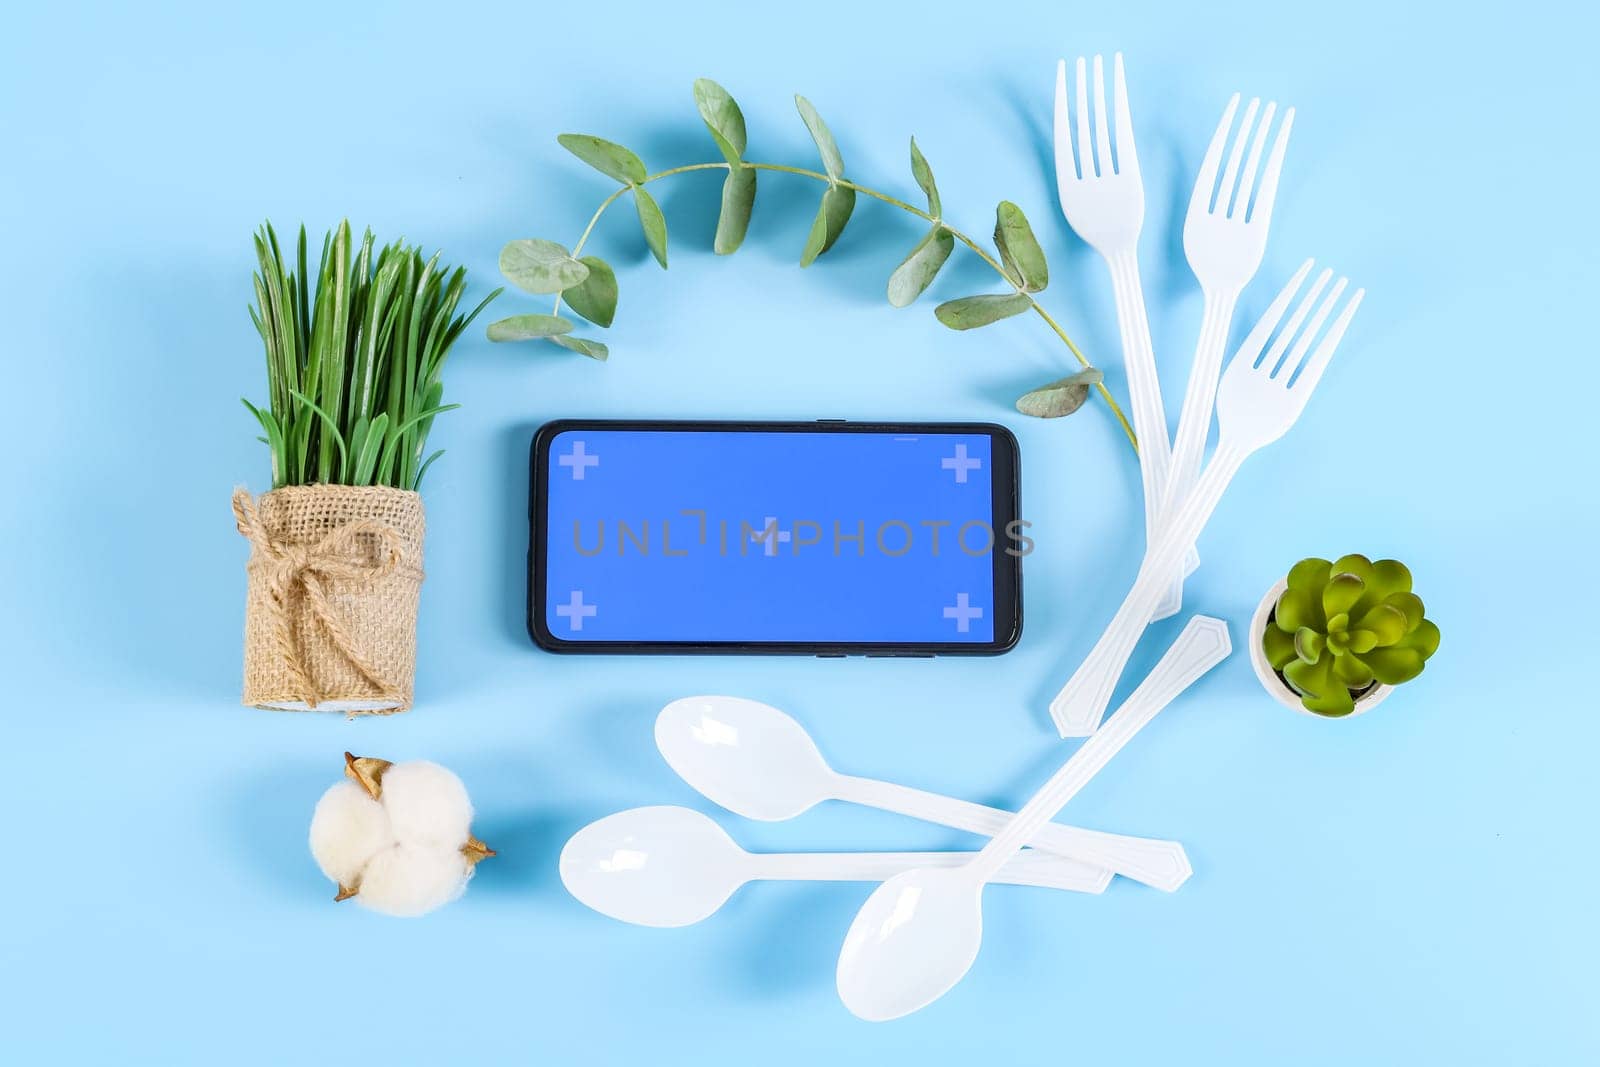 Mobile phone with a blue screen, disposable white glasses, eucalyptus branch, cotton flower, succulent, sprouted wheat in a pot and disposable cutlery lie on a pastel blue background, flat lay close-up.